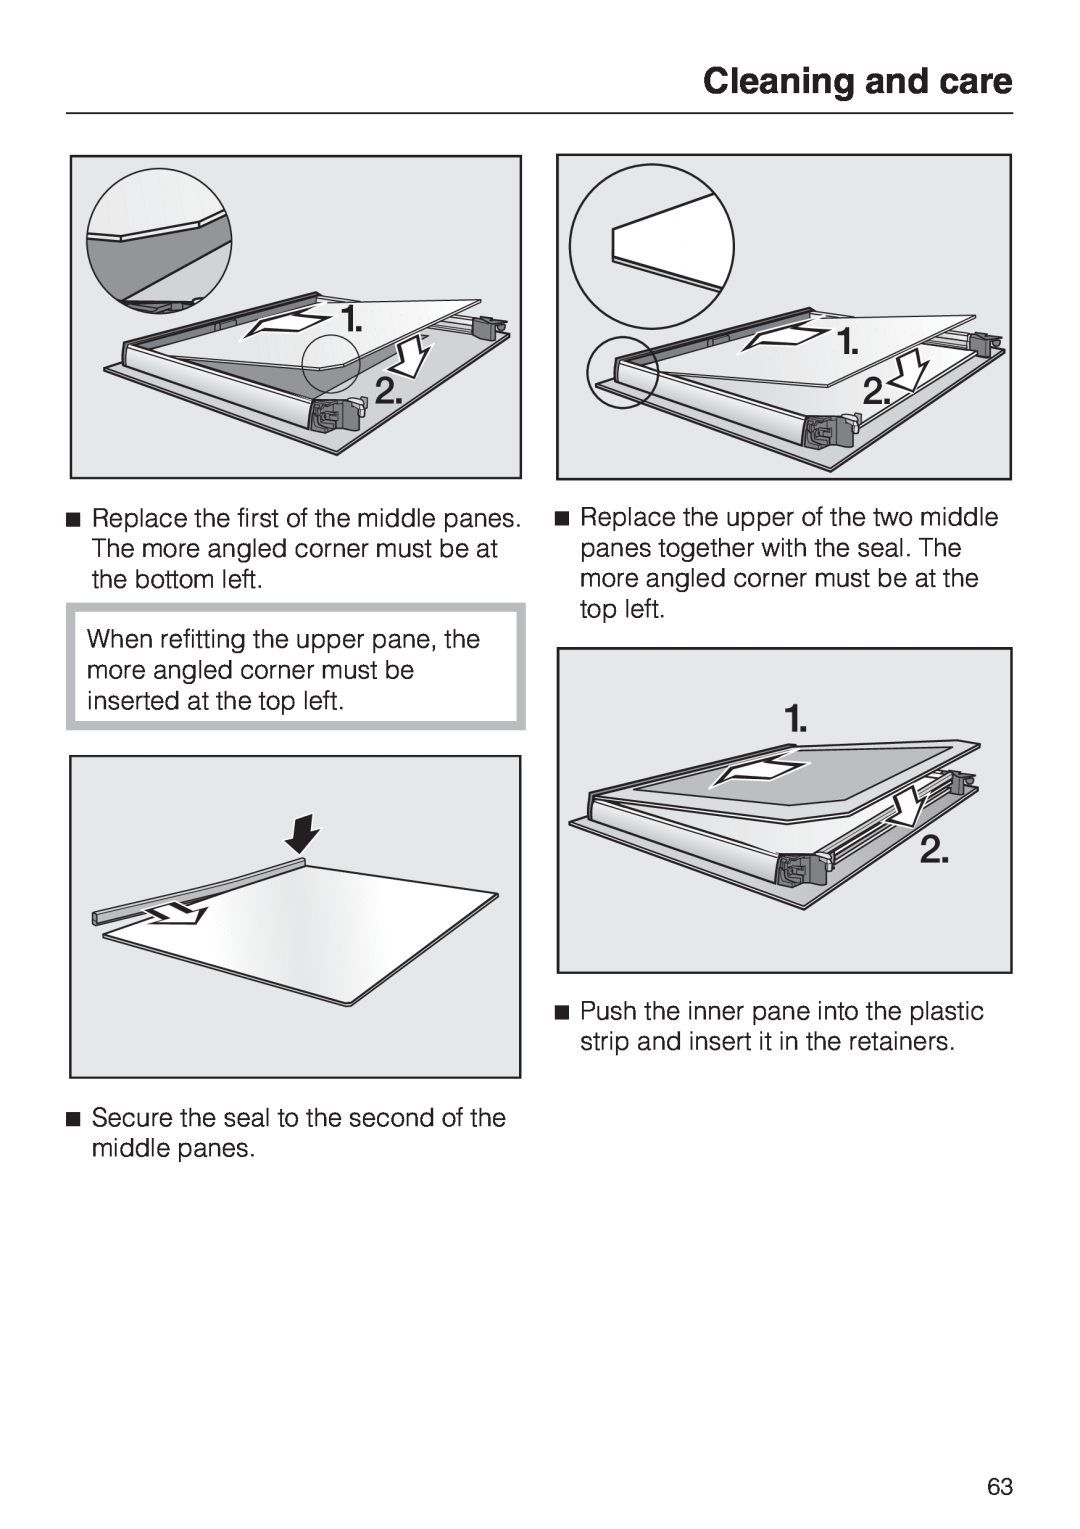 Miele H 5961 B installation instructions Cleaning and care, Secure the seal to the second of the middle panes 